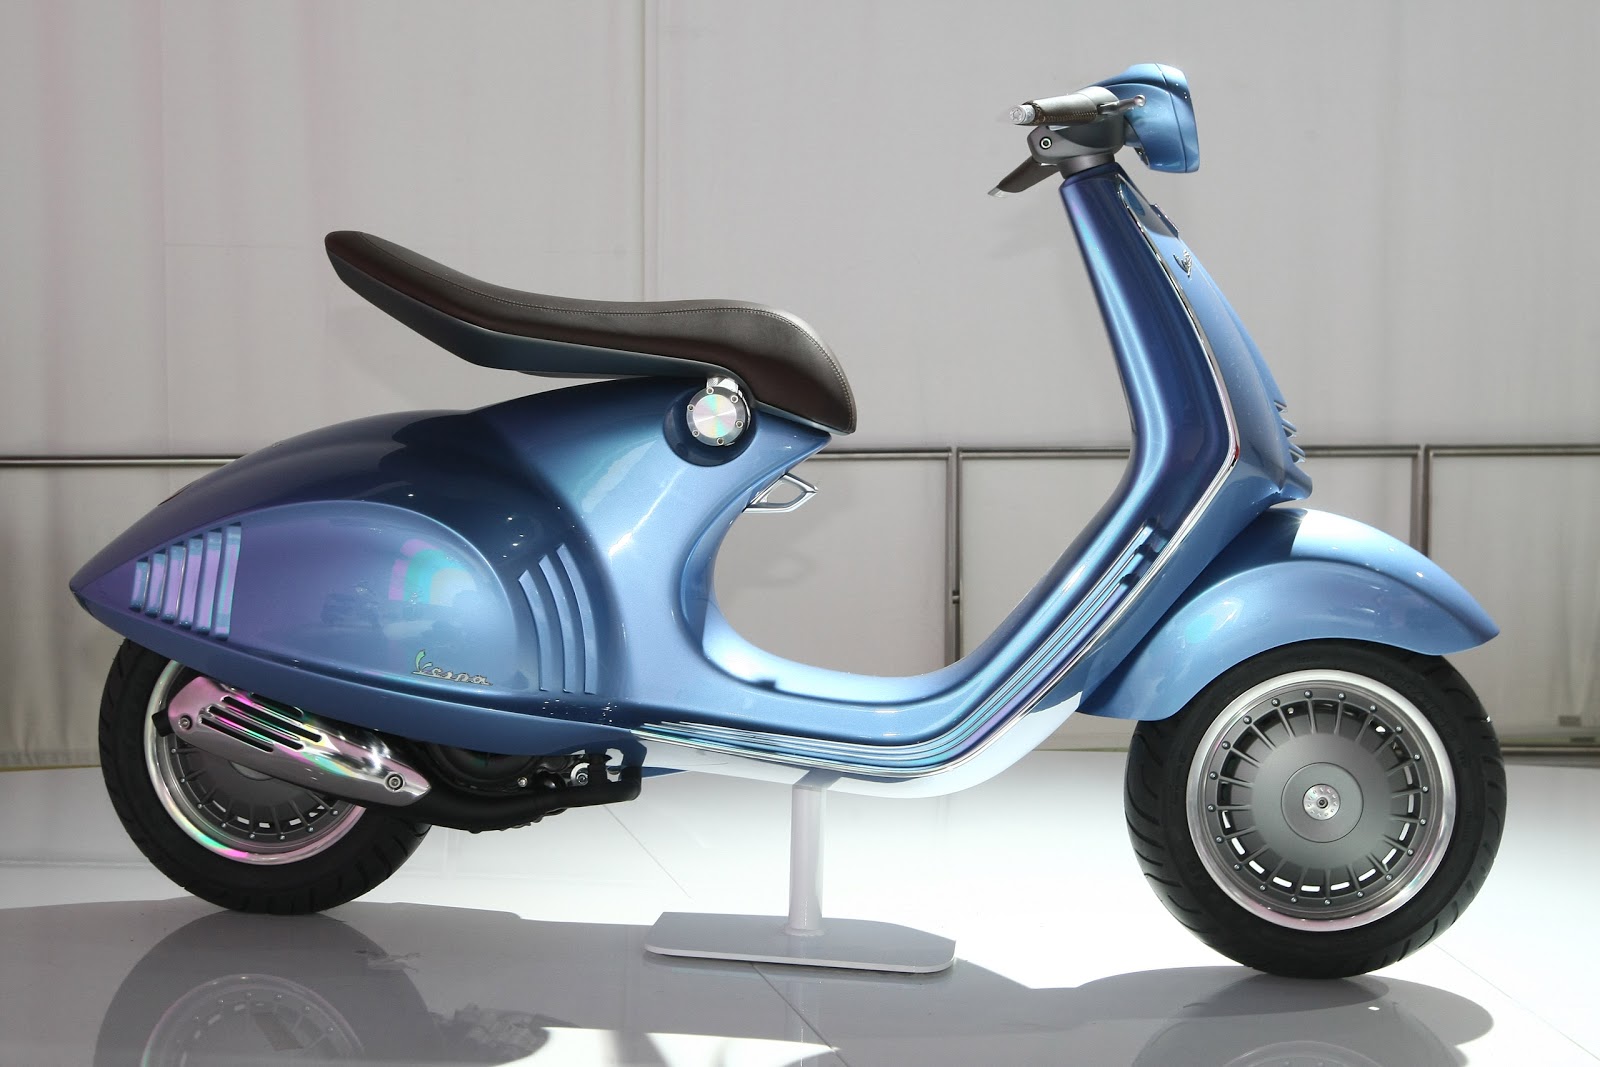 Vespa 946 Production Has been Approved